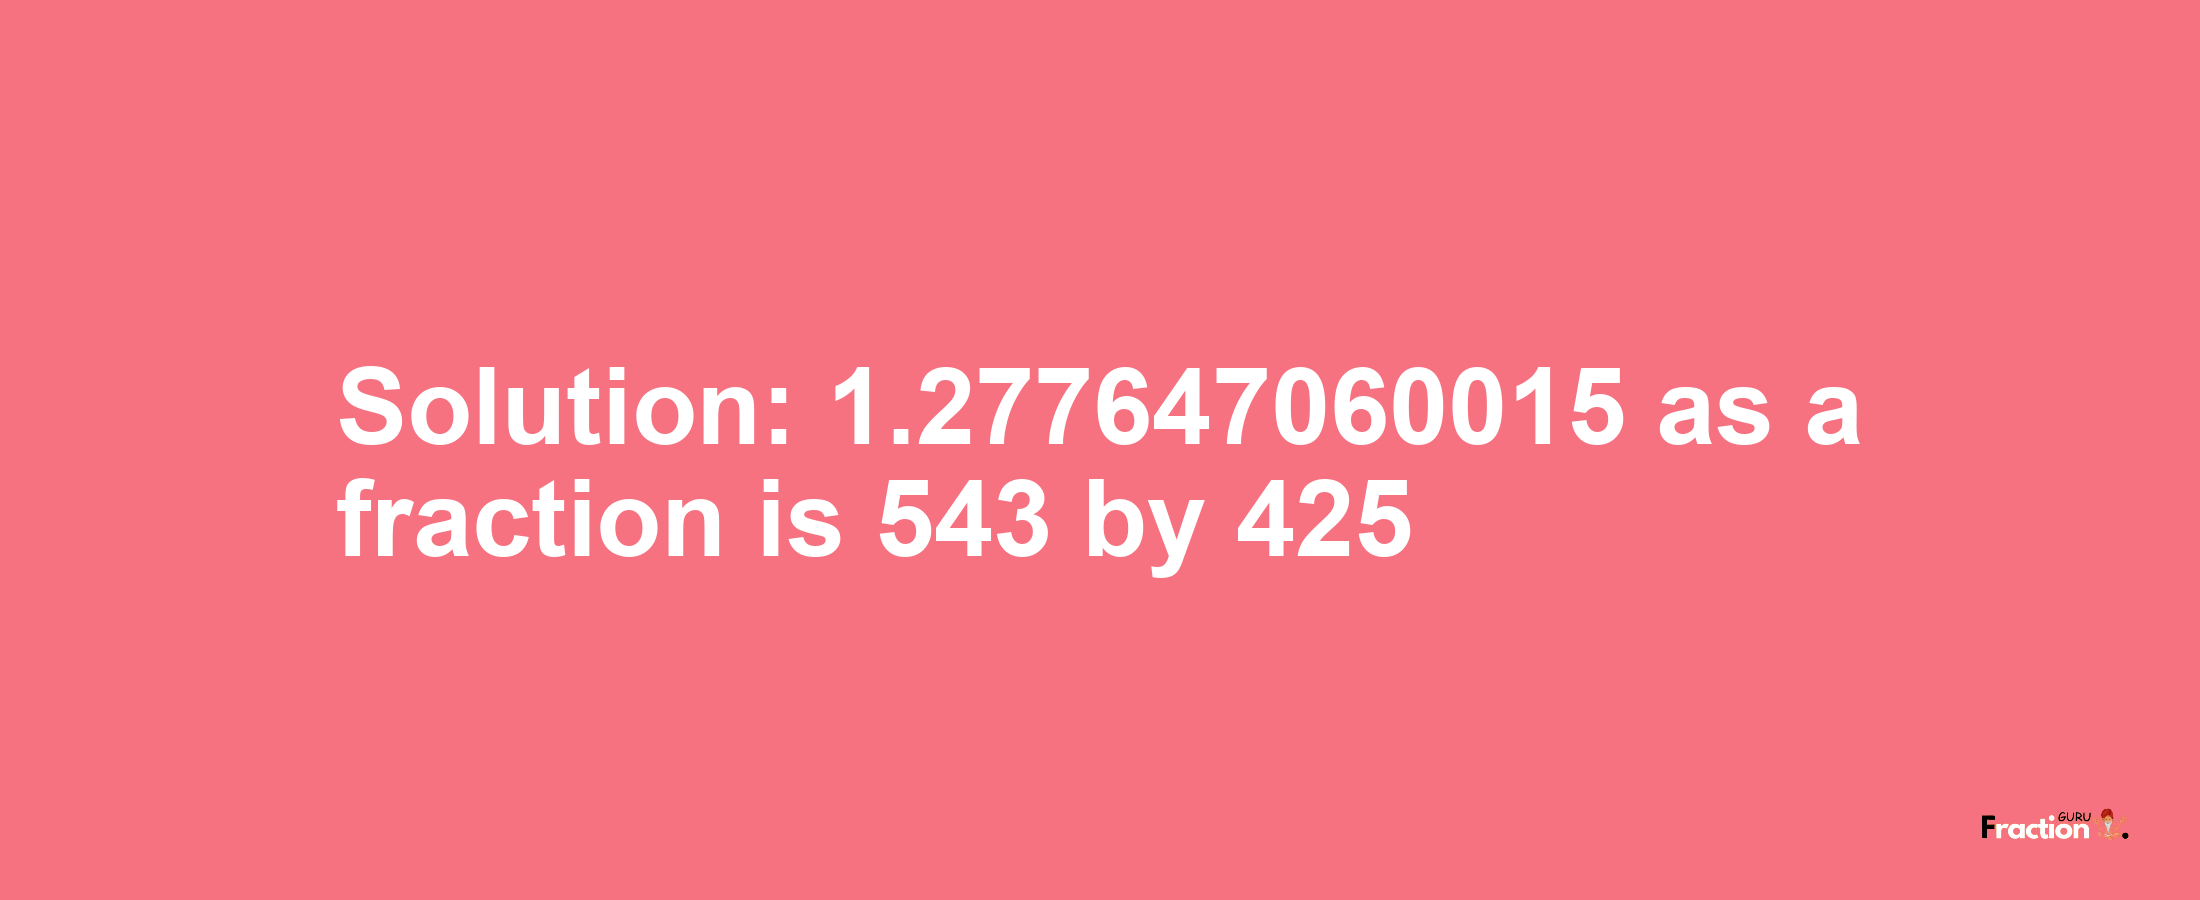 Solution:1.277647060015 as a fraction is 543/425